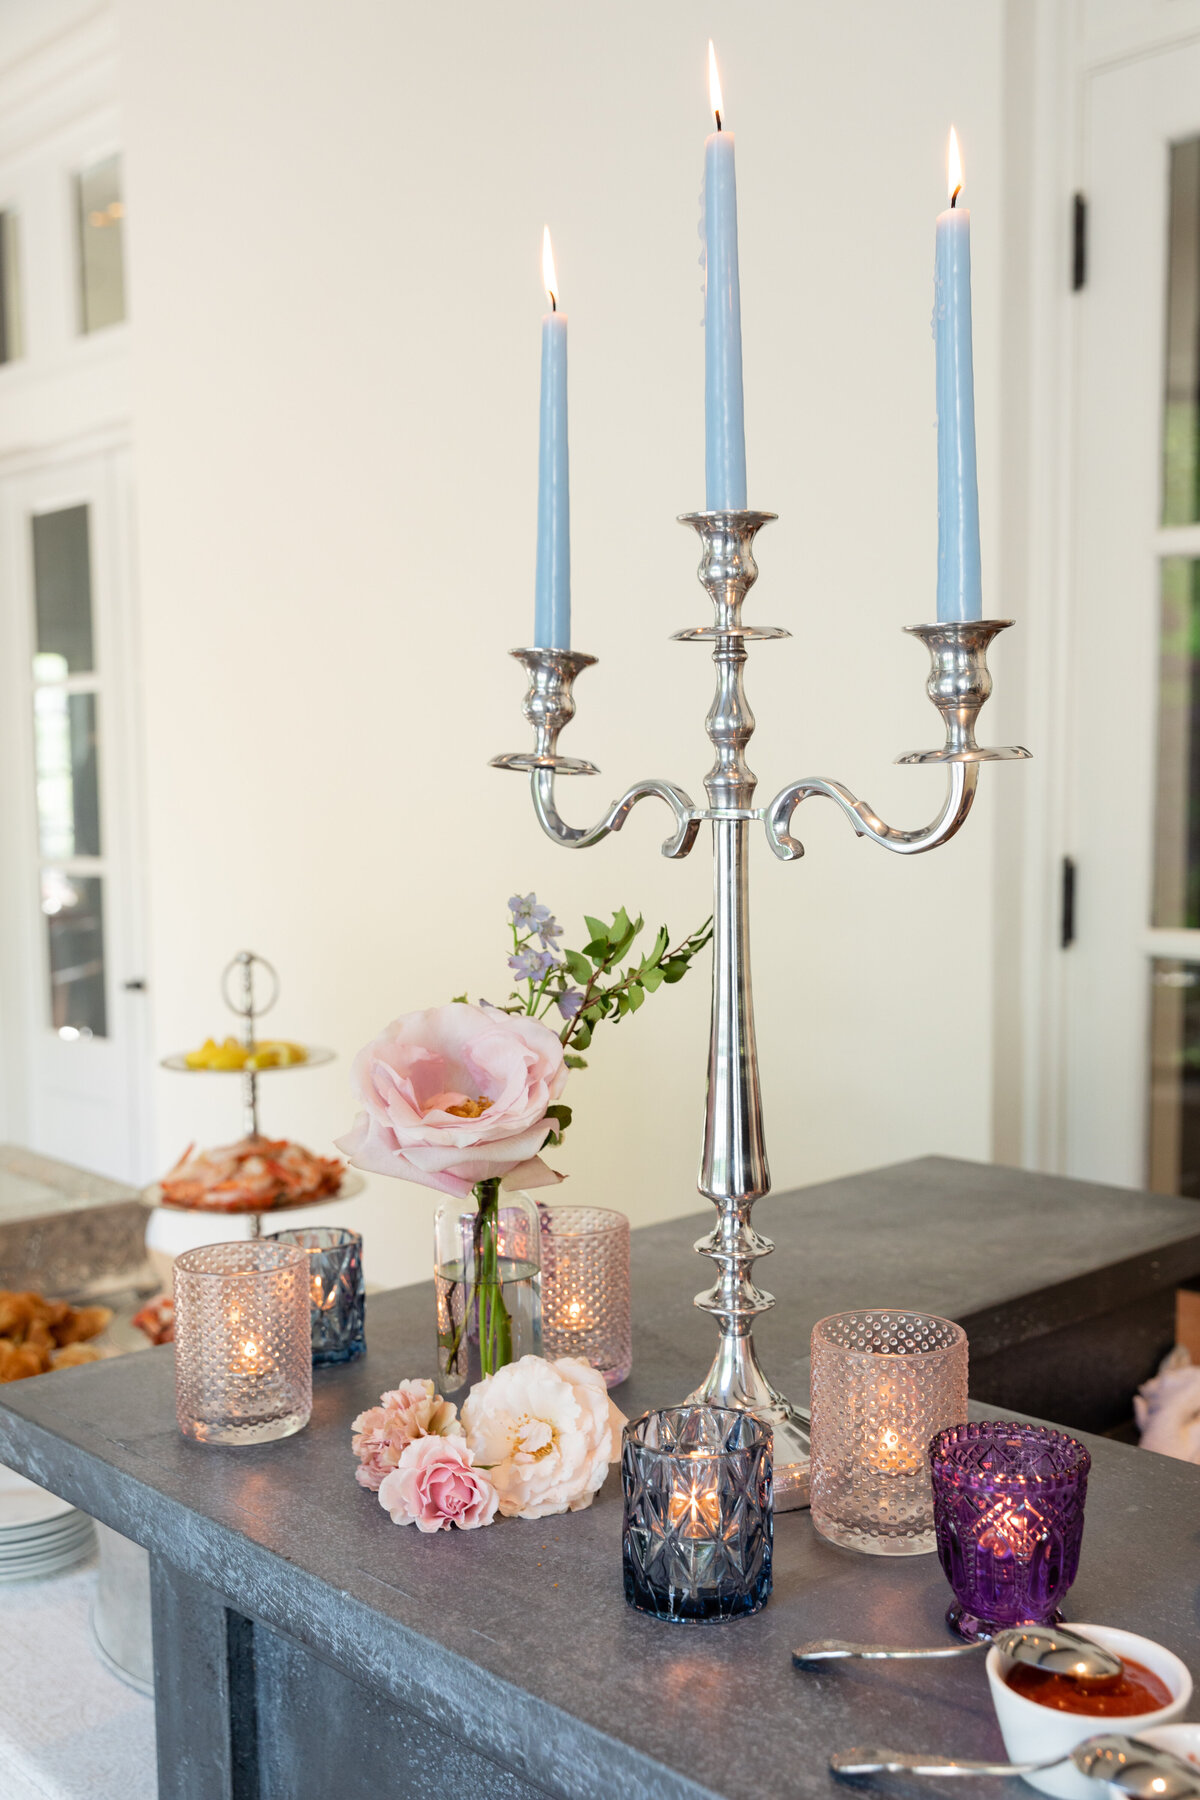 Bridgerton inspired engagement party at a private home in Nashville, TN with lush, organic florals of wisteria, spanish moss, and pastel blooms. Silver candelabra with light blue tapers and styled flowers.